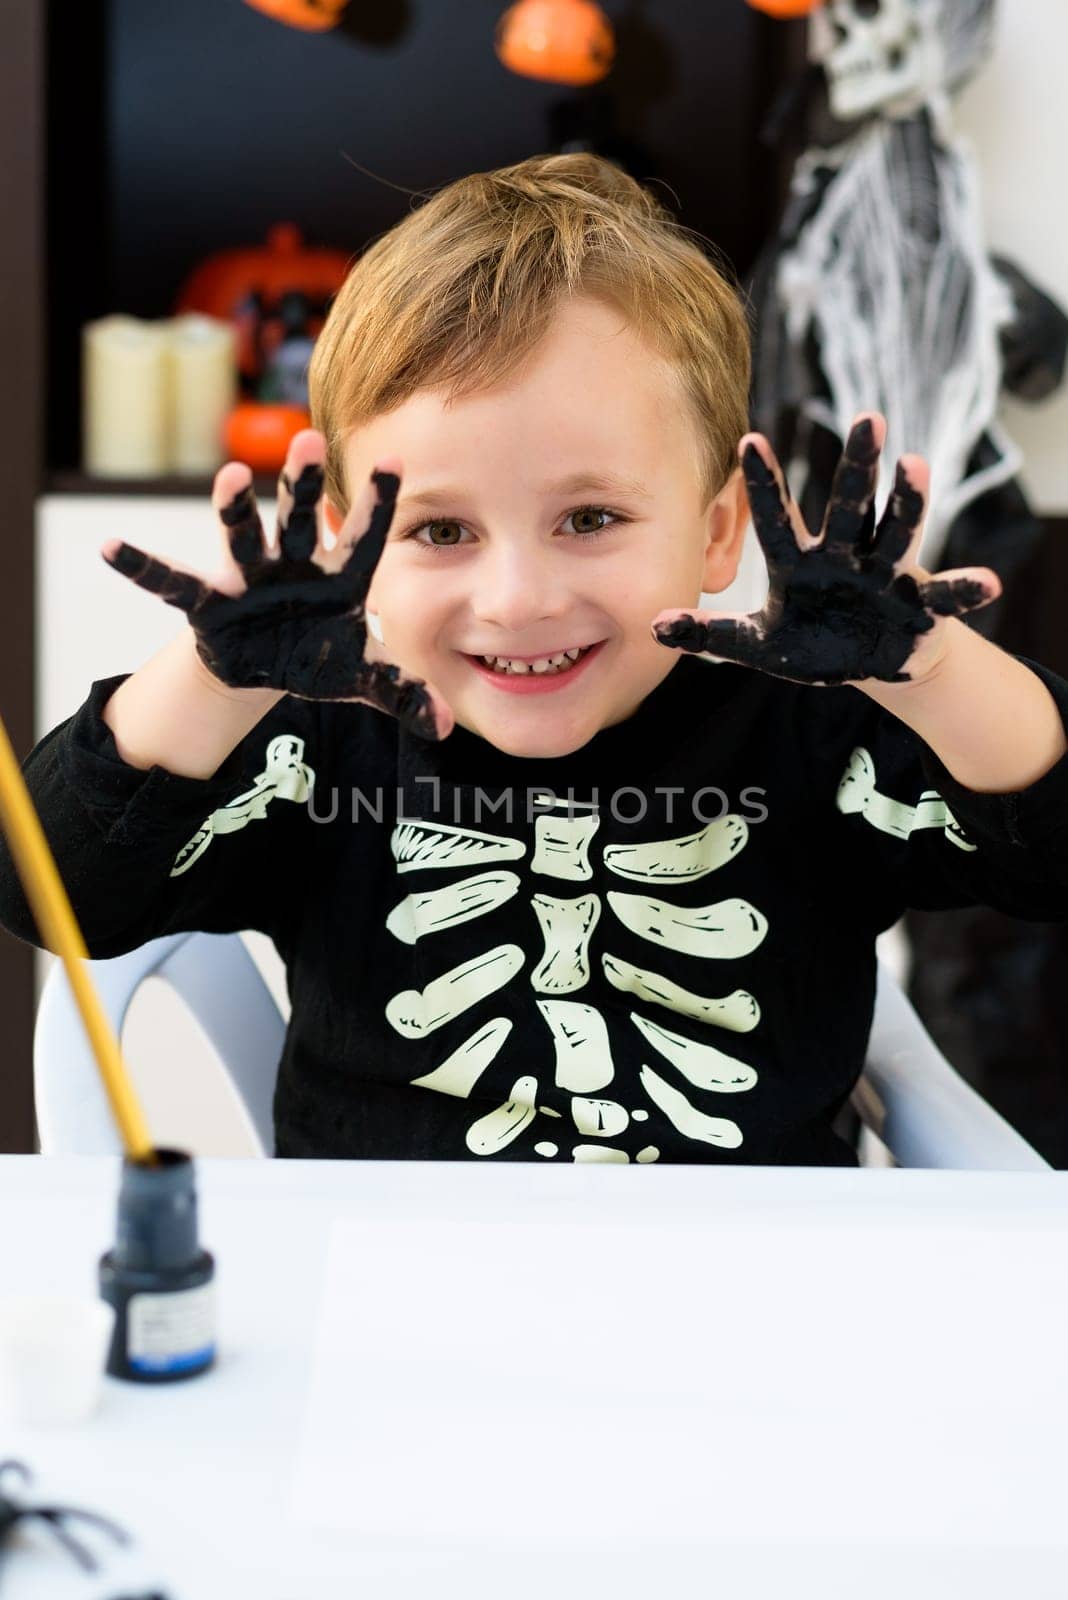 A child dressed as a skeleton shows spider and ghost crafts. Halloween party by jcdiazhidalgo